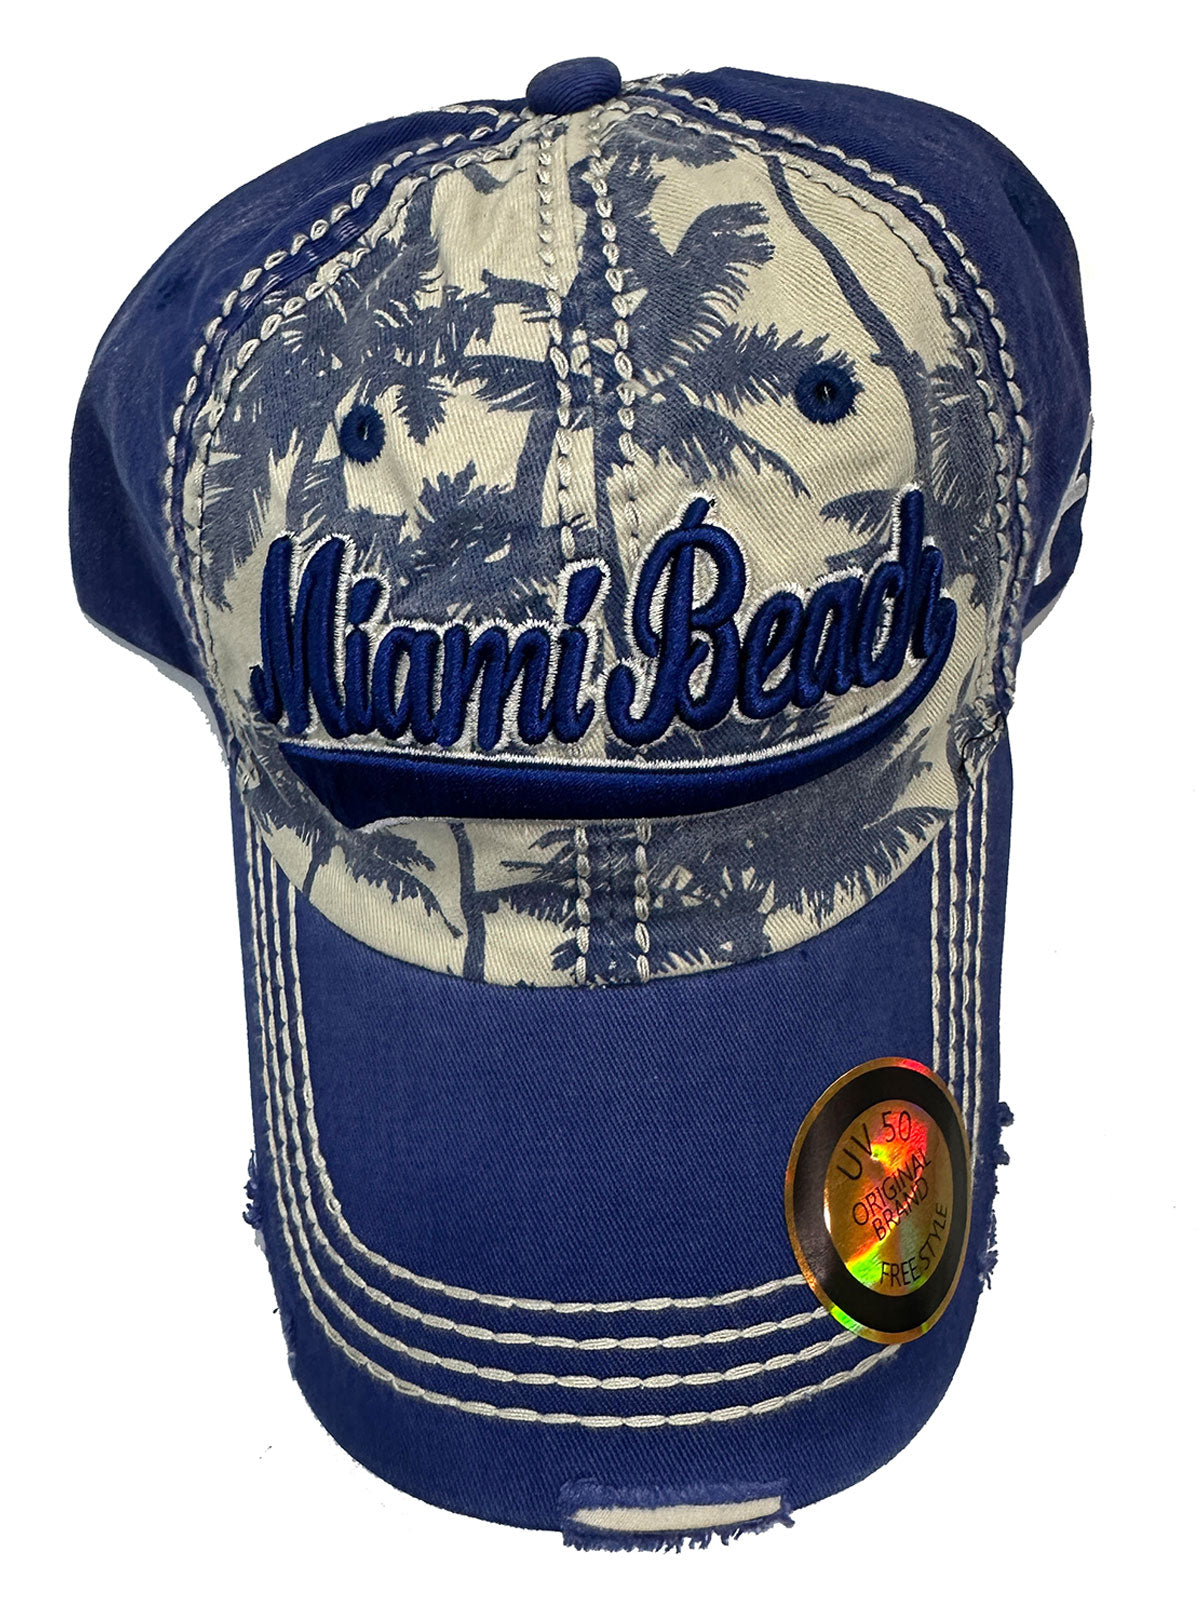 Miami Beach Washed Style Hats Assortment, Adult Size UV 50 - One Size Fits Most, Dad or Mom Gift Baseball Cap